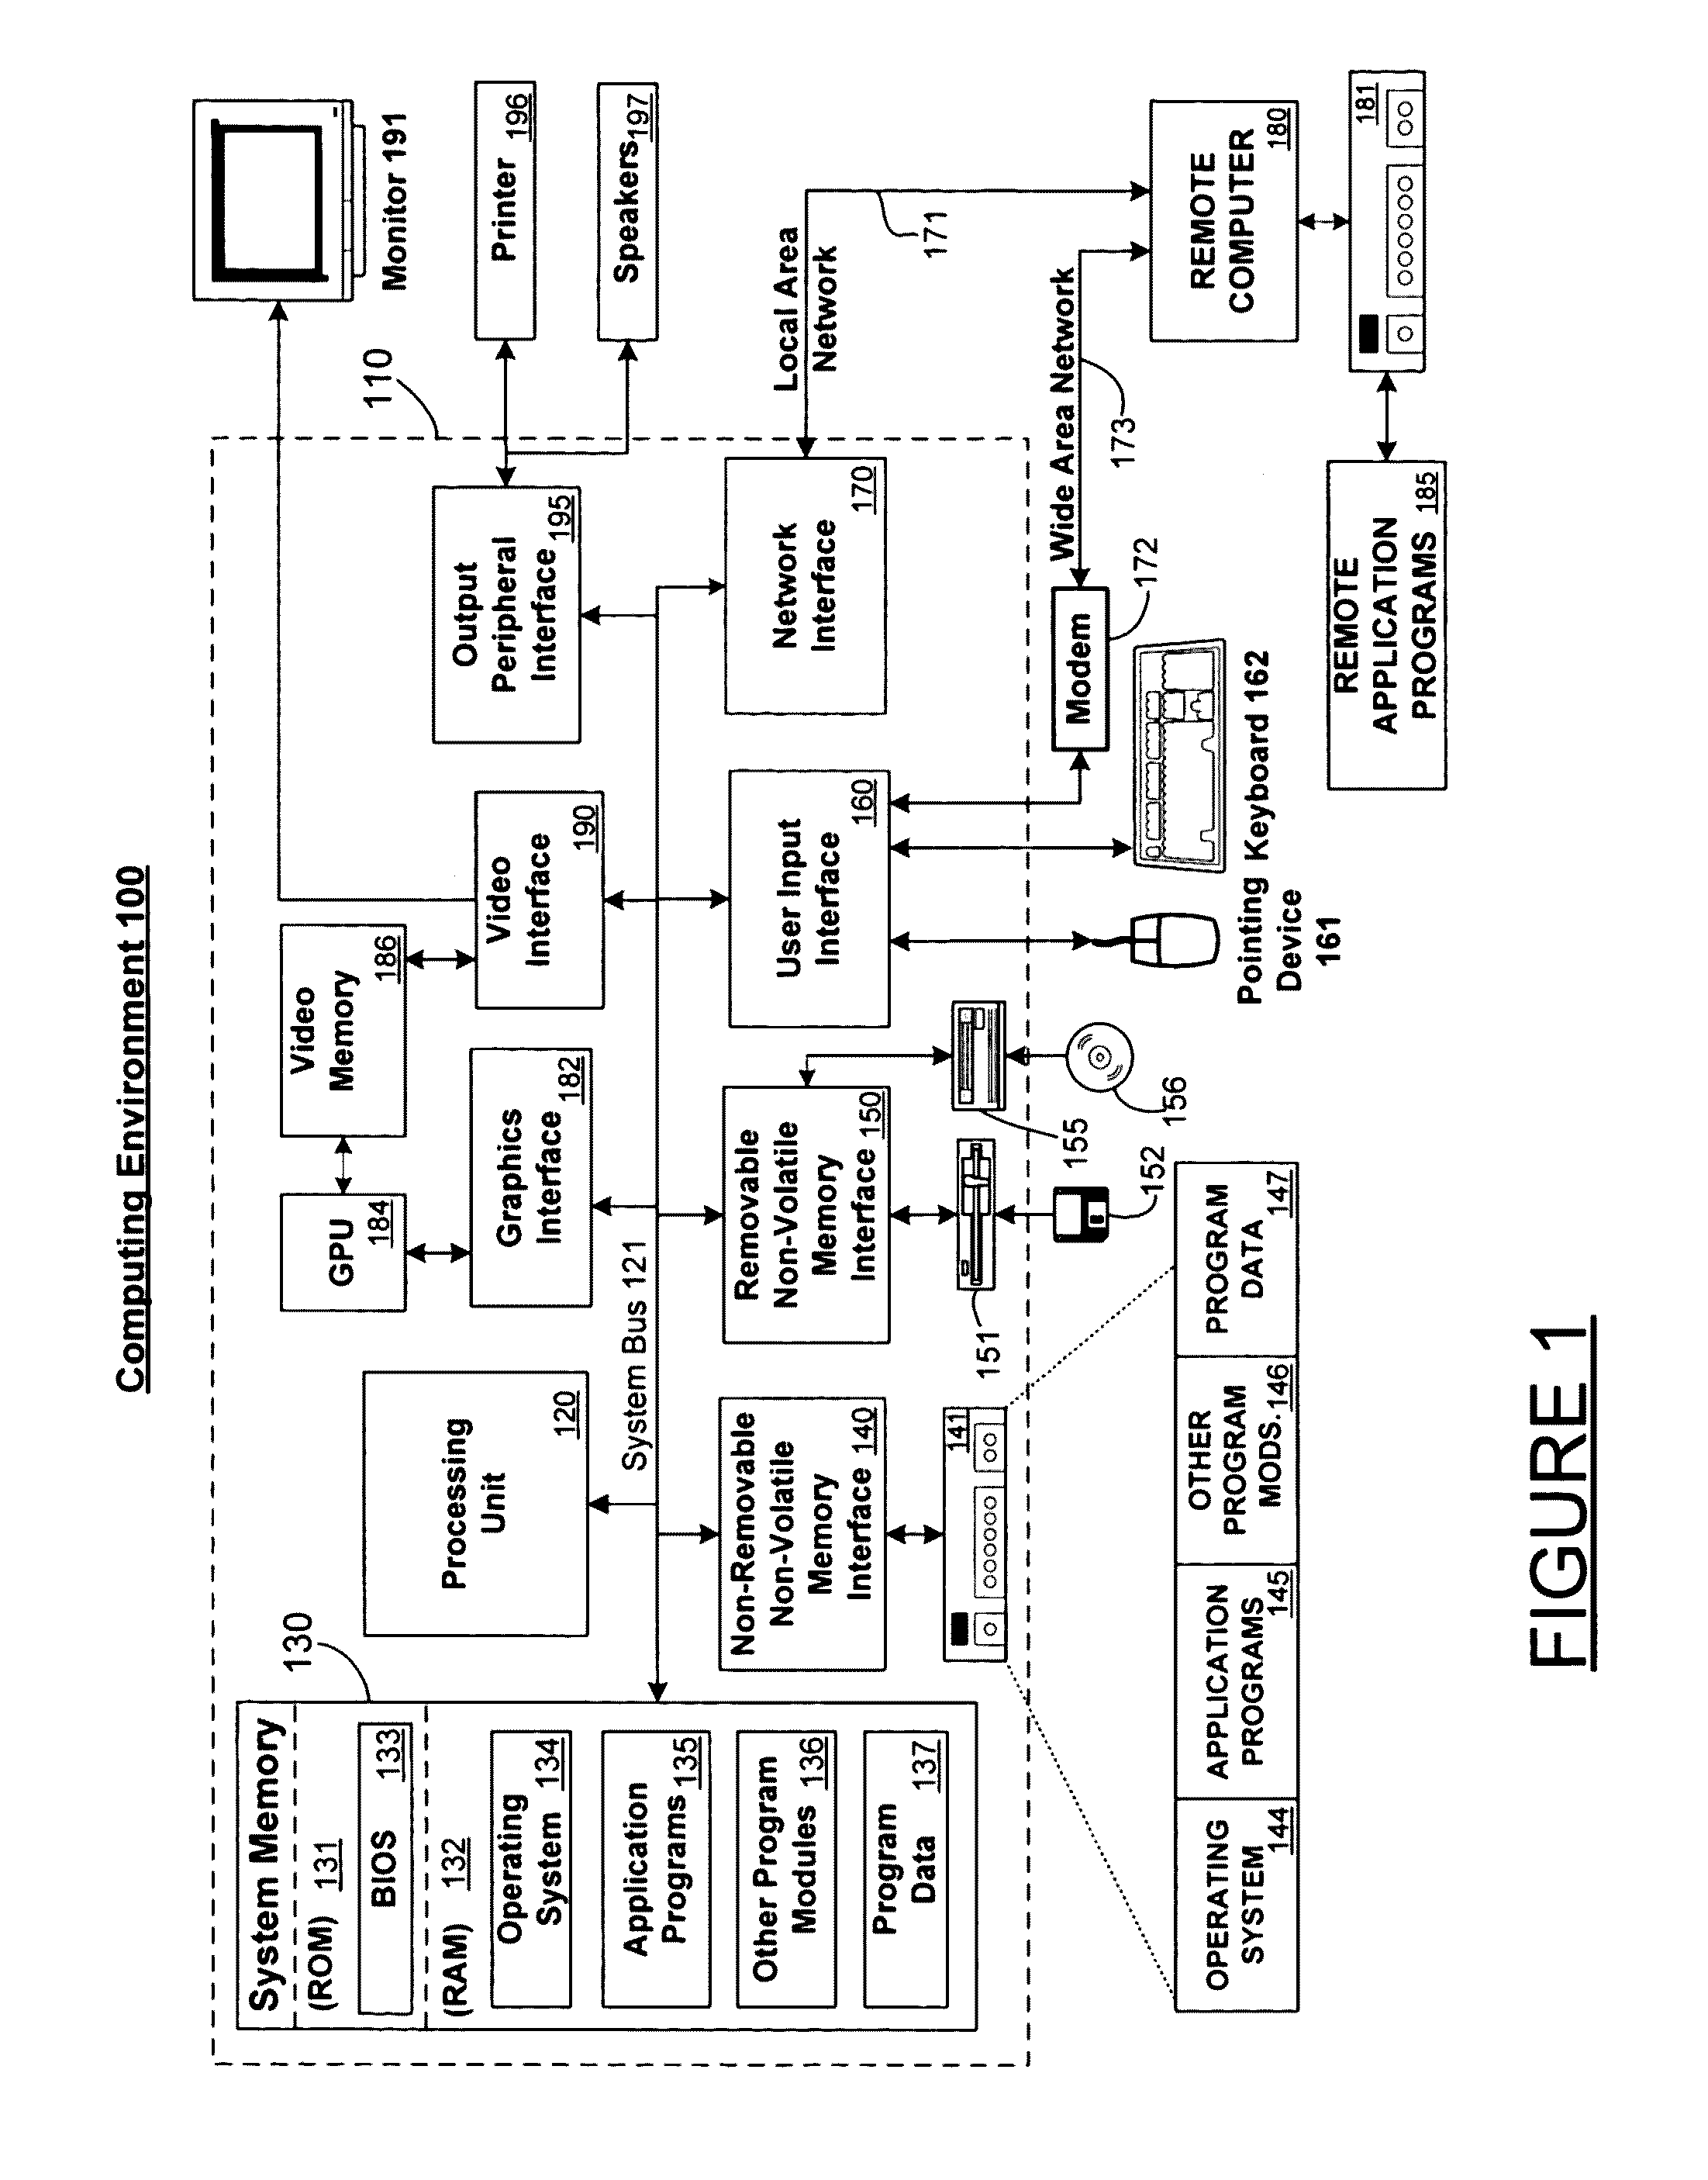 Apparatus, system and method for application-specific and customizable semantic similarity measurement